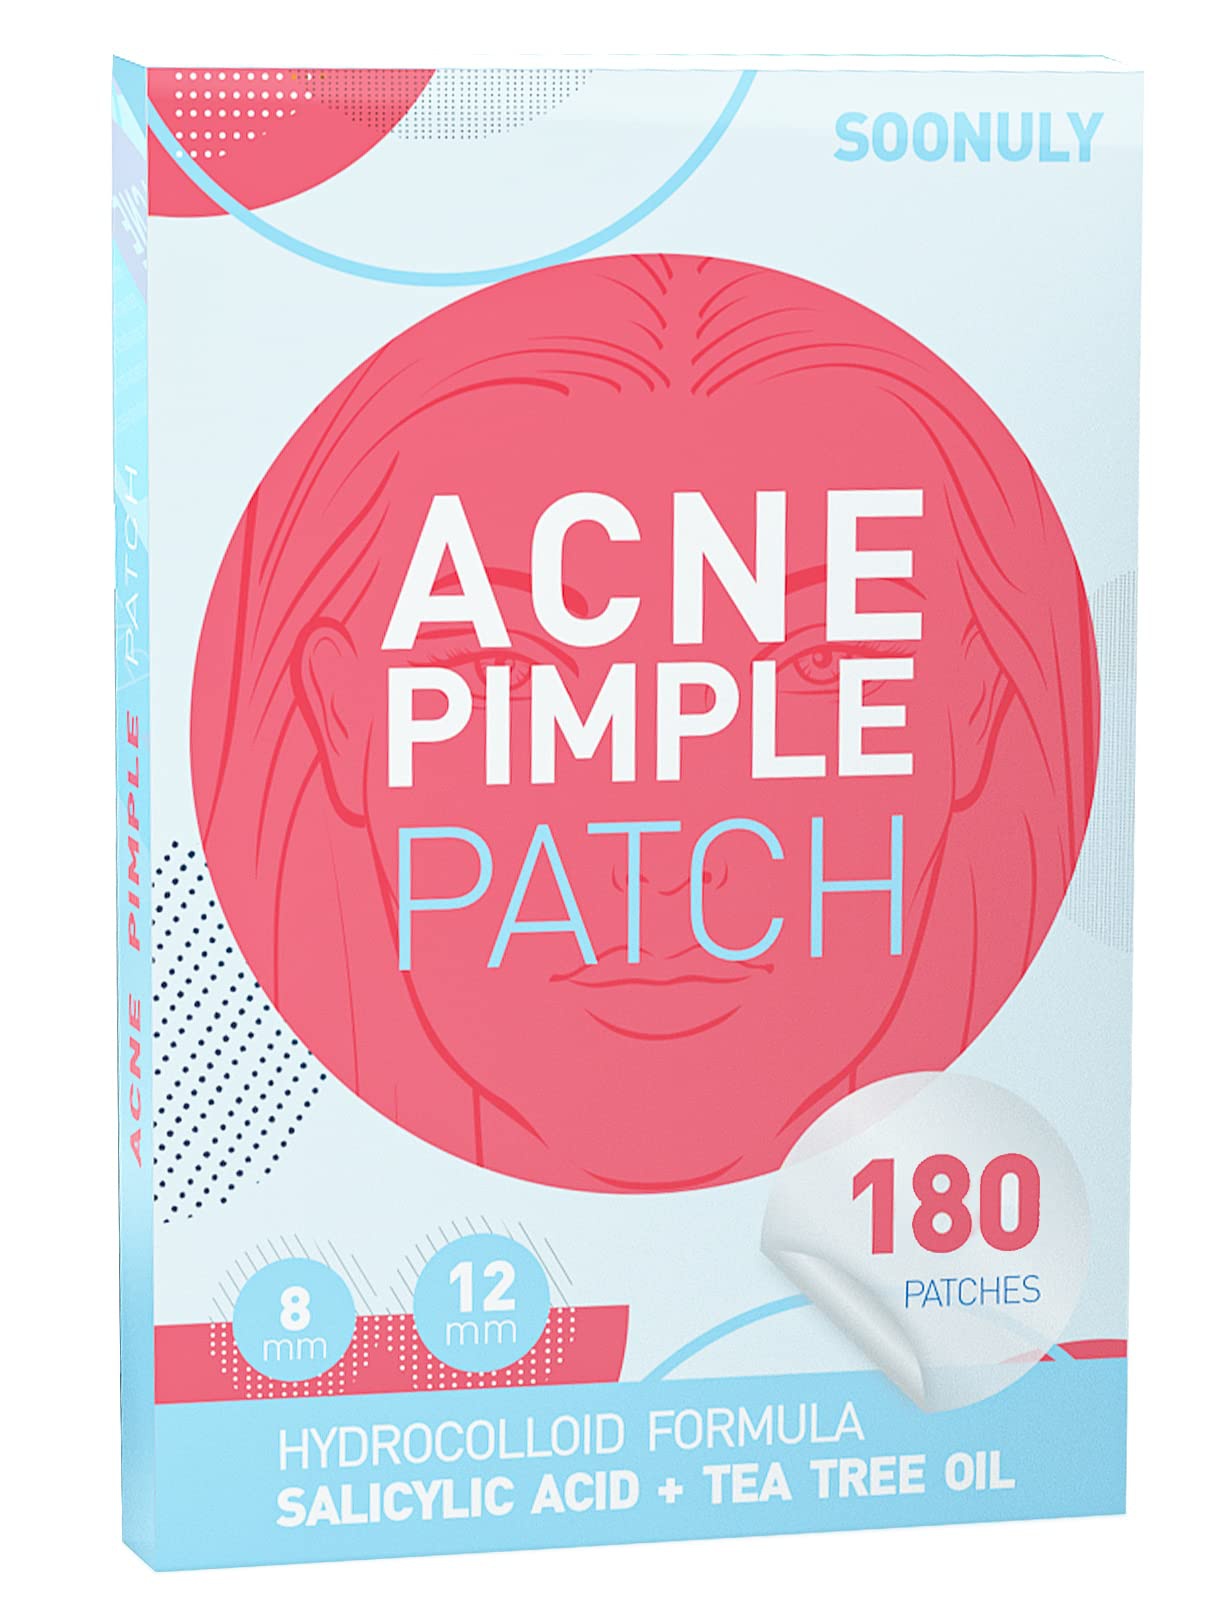 Soonuly Acne Pimple Patches For Face - 180 Hydrocolloid Acne Patches Salicylic Acid W